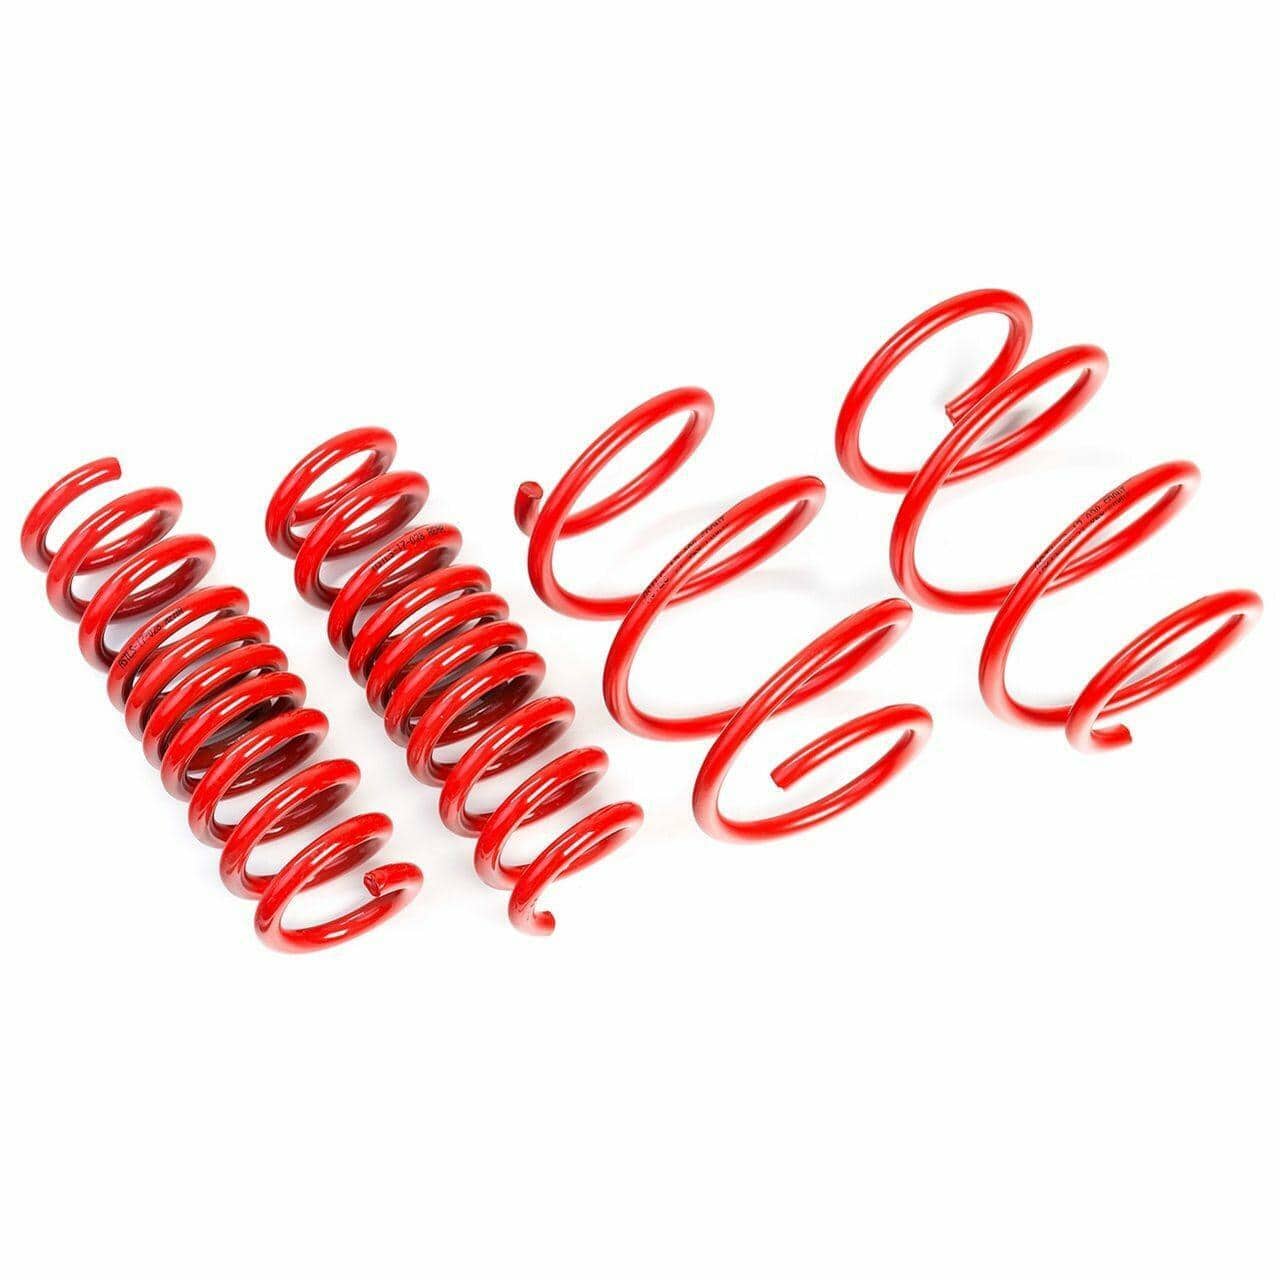 AST Suspension Lowering Springs (70MM/20MM) - 1990-1998 BMW 3 Series 316i/318i/318TDS Compact/Coupe (E36) ASTLS-14-351